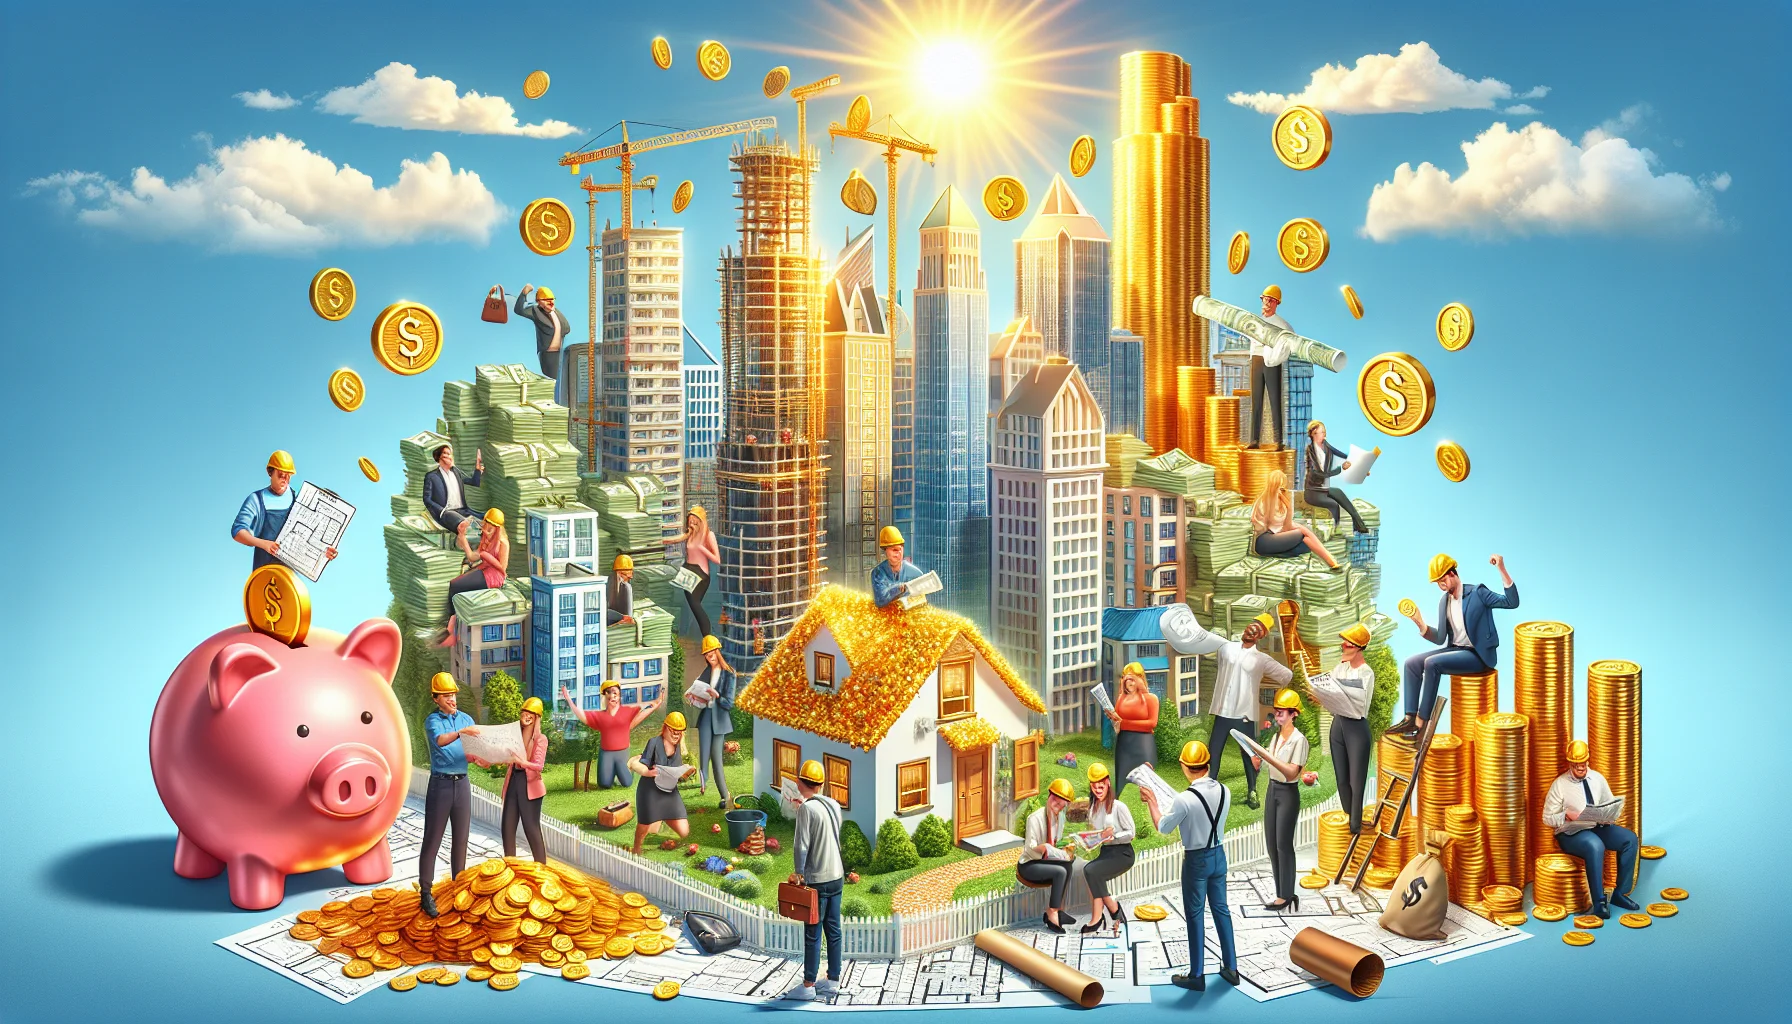 Illustrate a humorous and realistic scene of the ideal investment in real estate. In the scene, depict diverse investors of both genders and various descents. They are holding a map representing a city filled with potential properties for investment. Nearby, a giant piggy bank is overflowing with coins. In one corner, a house made of solid gold is seen, symbolising a successful investment. The city skyscrapers are made of stacks of money bills. Everyone in the scene is wearing hard hats and examining blueprints, signifying the planning and construction side of real estate. A vibrant sun in the sky is casting a golden light on the scene exemplifying possibility and prosperity.